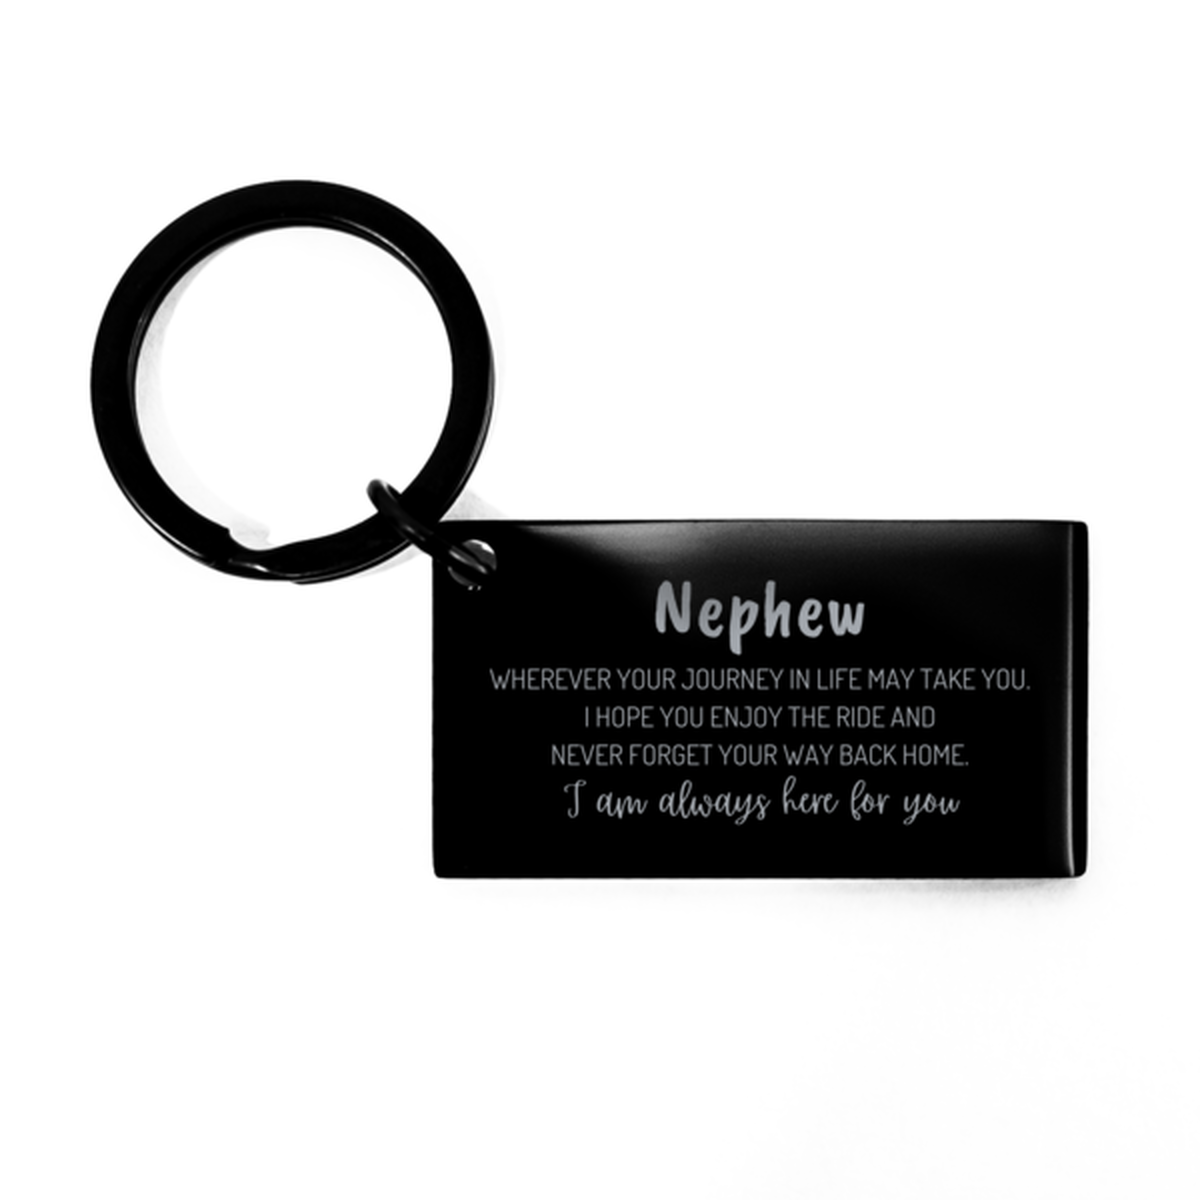 Nephew wherever your journey in life may take you, I am always here for you Nephew Keychain, Awesome Christmas Gifts For Nephew, Nephew Birthday Gifts for Men Women Family Loved One